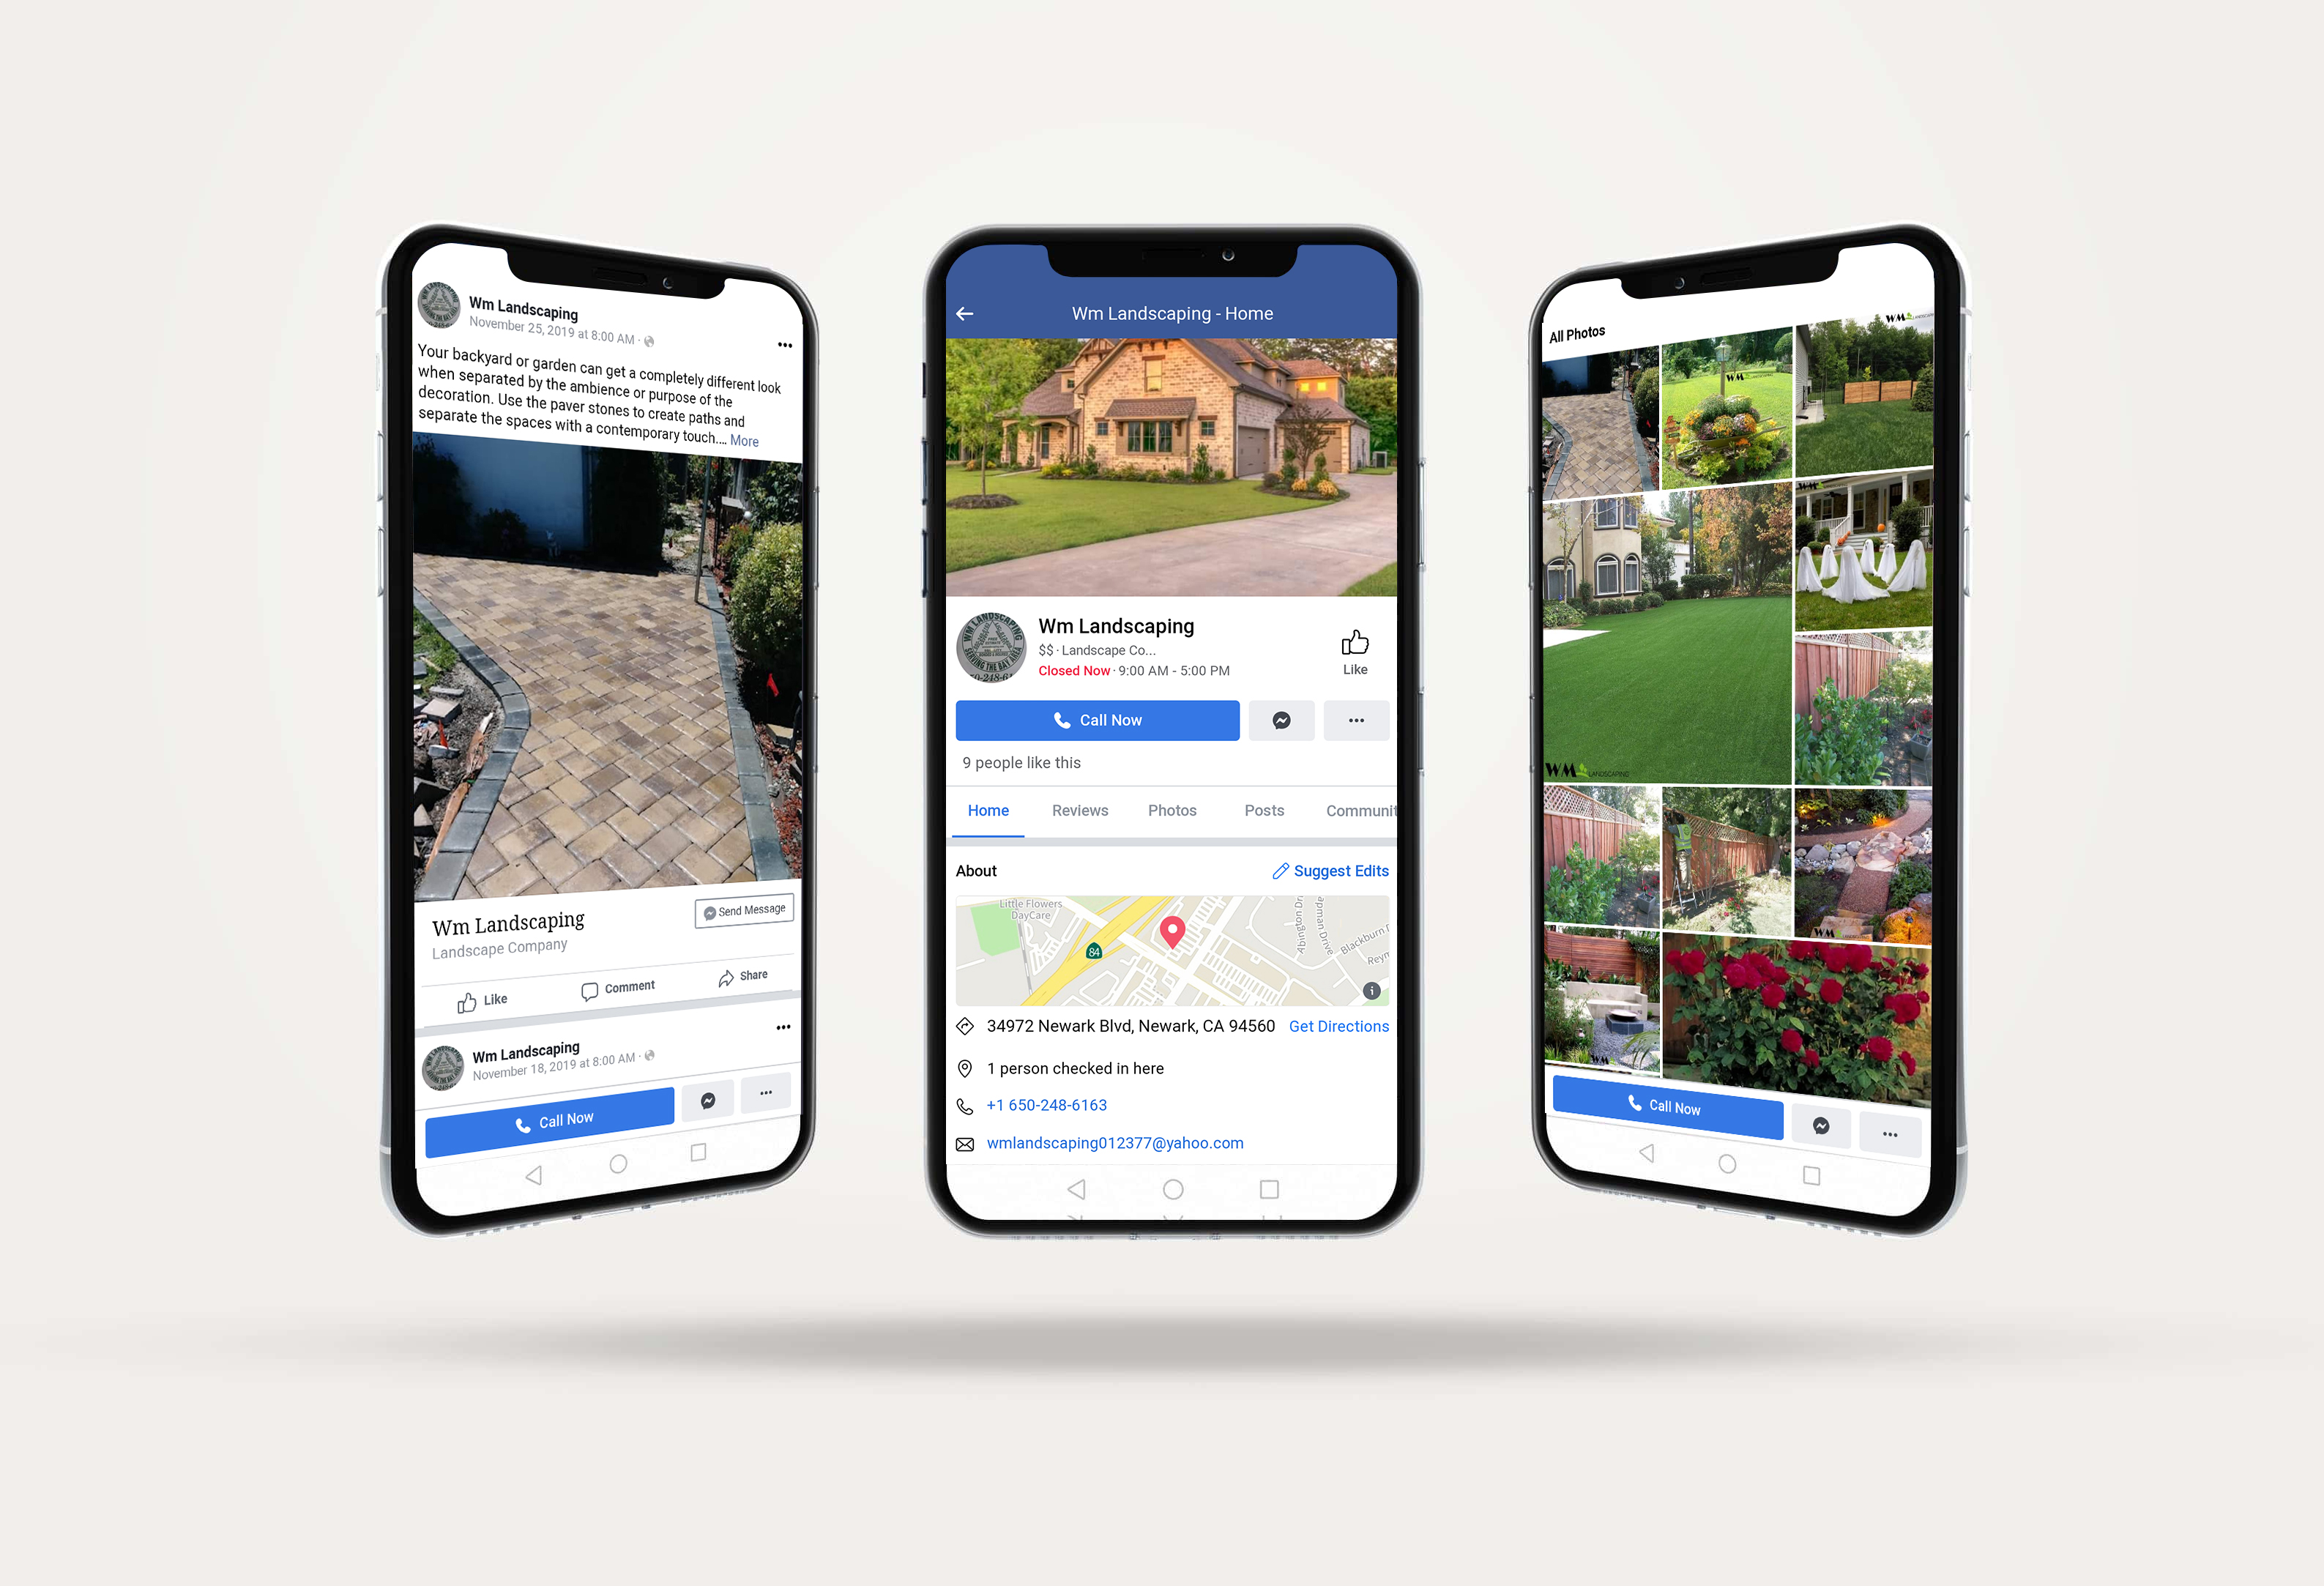 Custom Facebook Posts Help WM Landscaping Reach Their Target Audience More Effectively